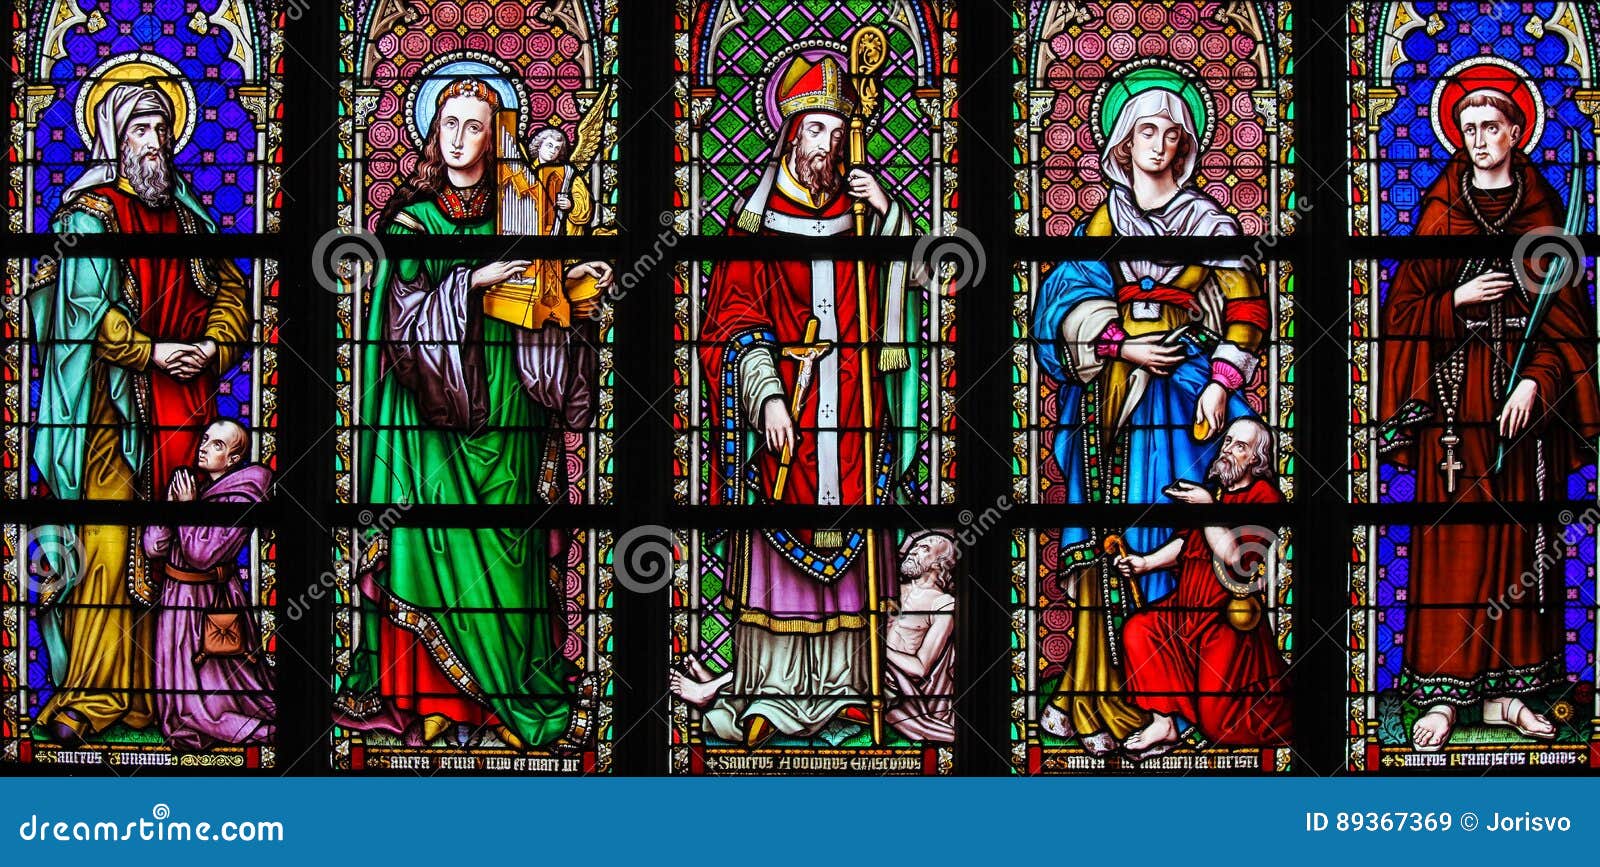 stained glass in brussels sablon church - catholic saints